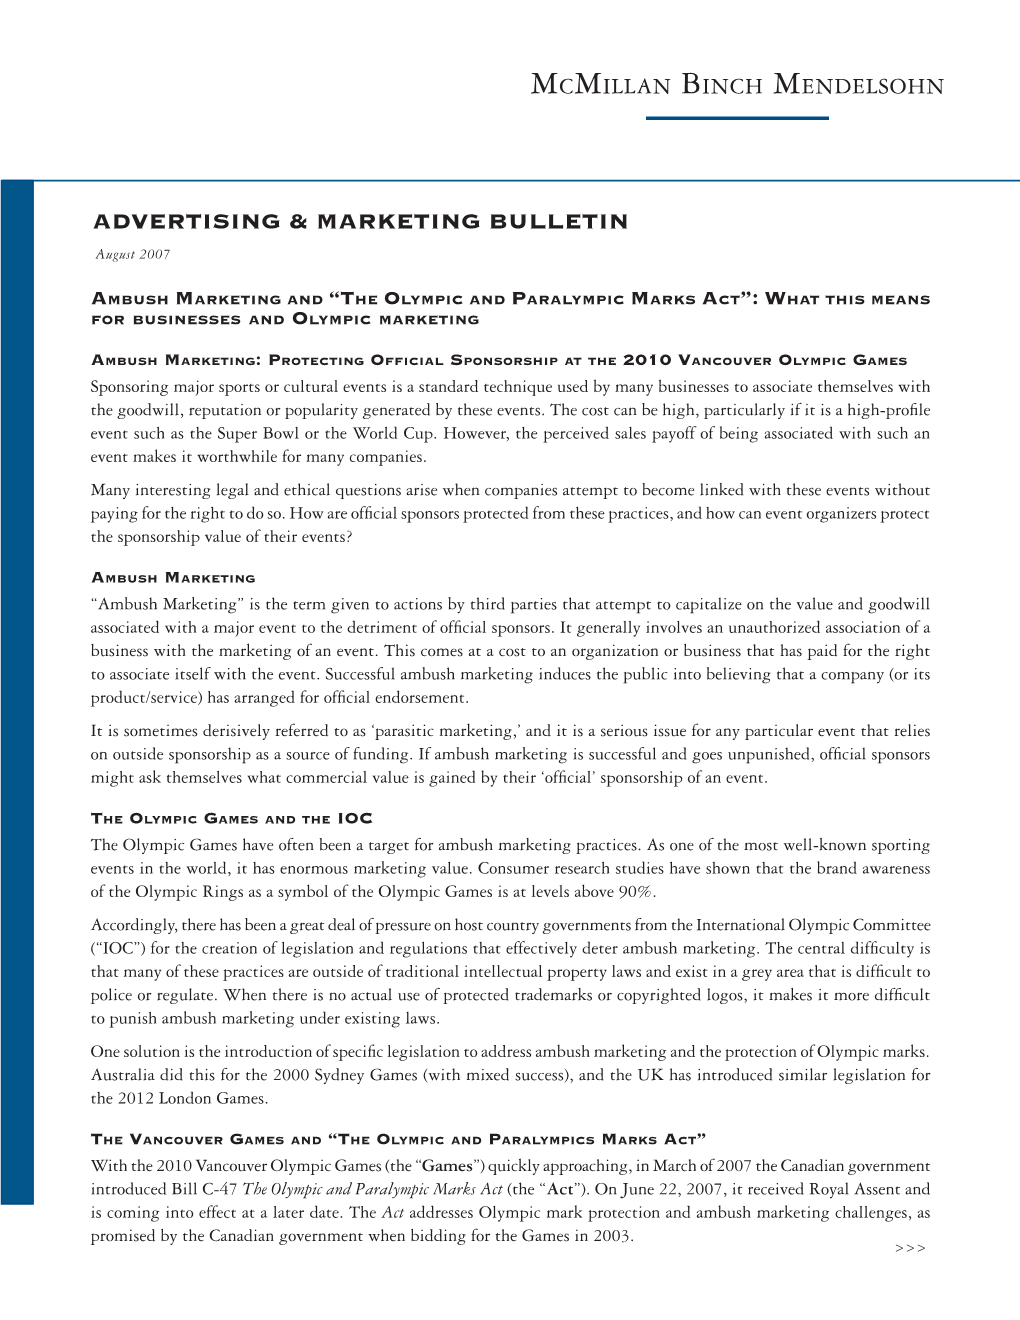 Ambush Marketing and "The Olympic and Paralympic Marks Act": What This Means for Businesses and Olympic Marketing